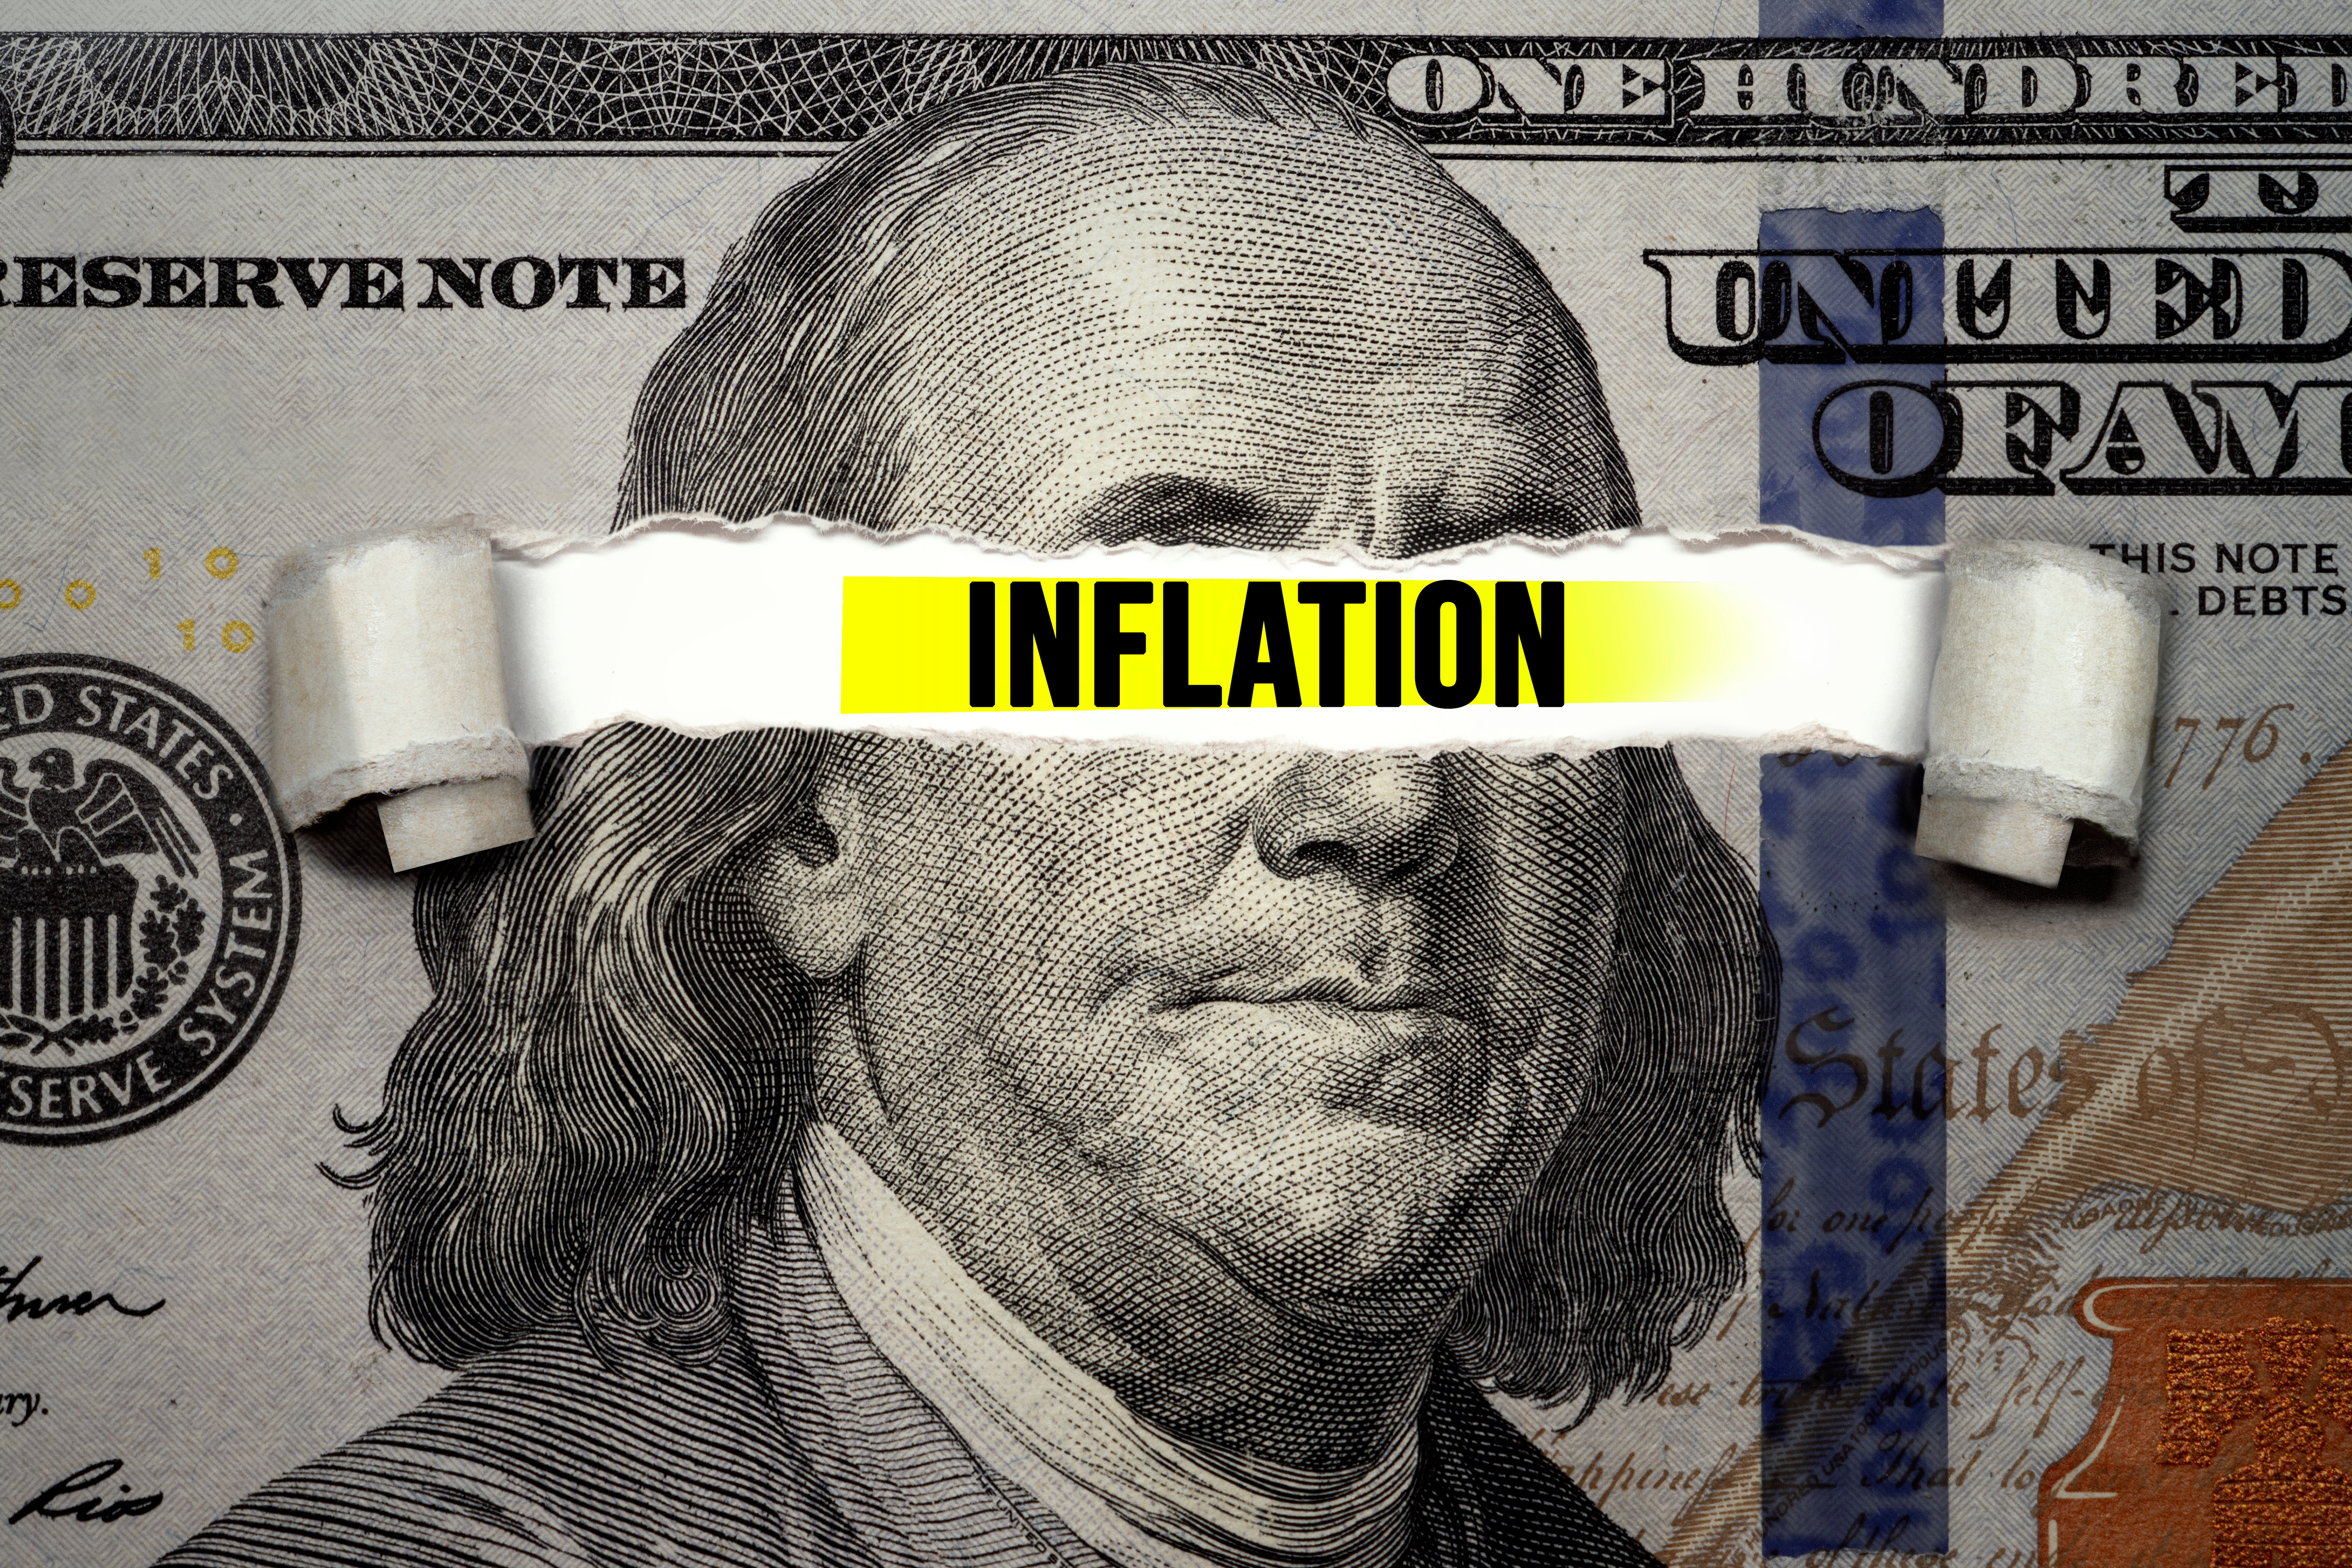 BUY ALERT: 3 "Inflation Busters" to Protect Your Retirement